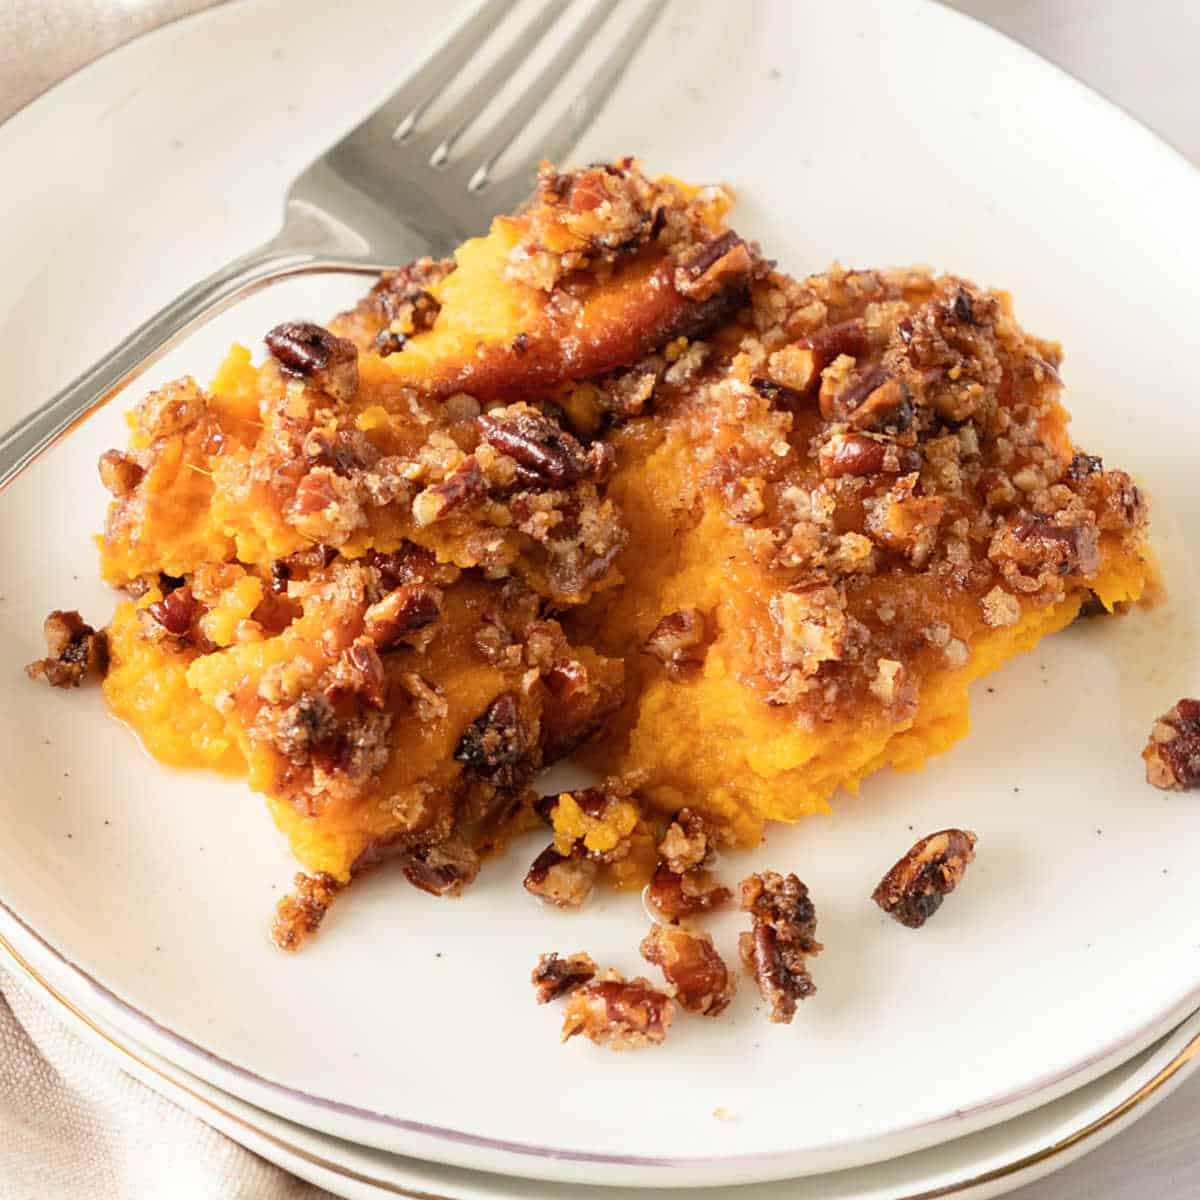 White plate with serving of sweet potato casserole with pecan topping. A silver fork.